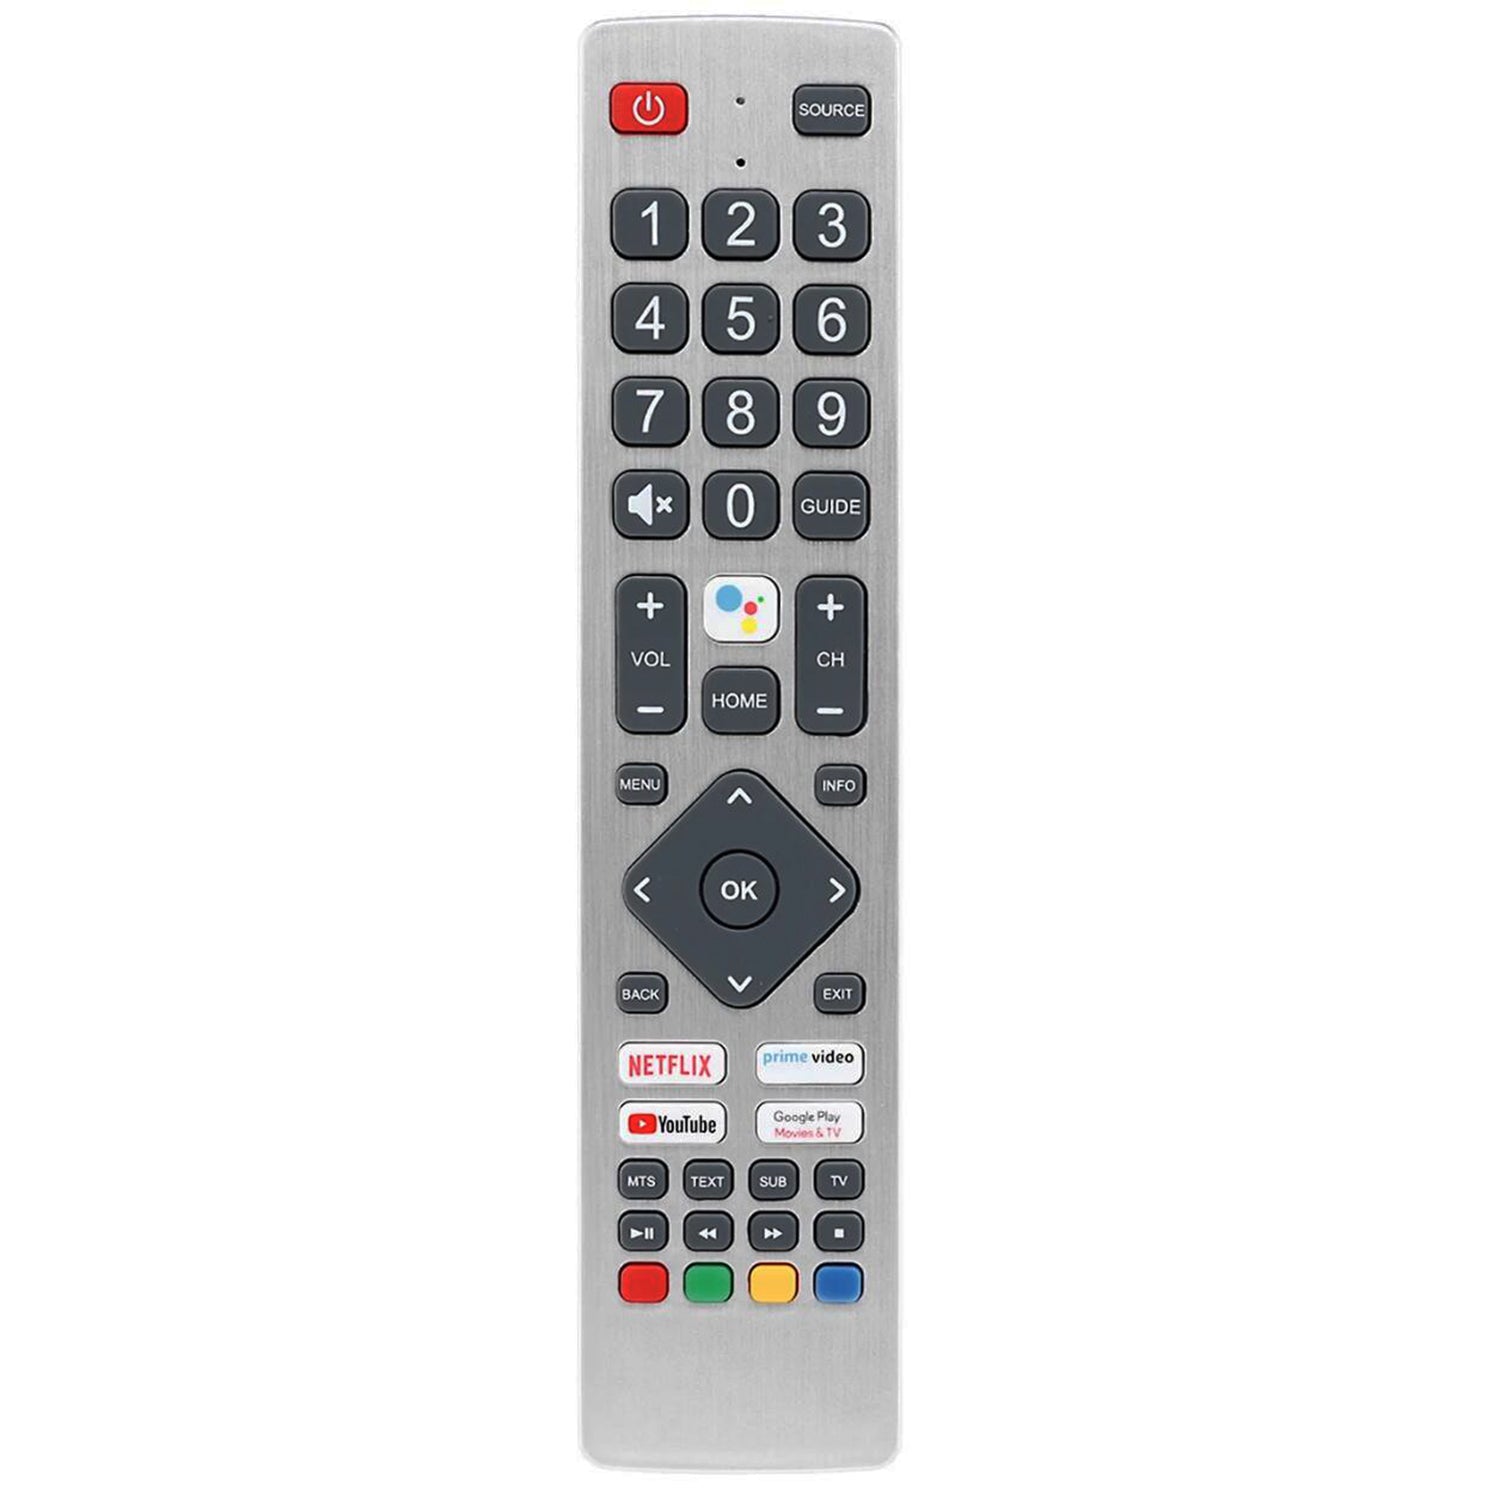 SHWRMC0133 Voice Remote Control Replacement for Sharp Aquos Ultra HD TV